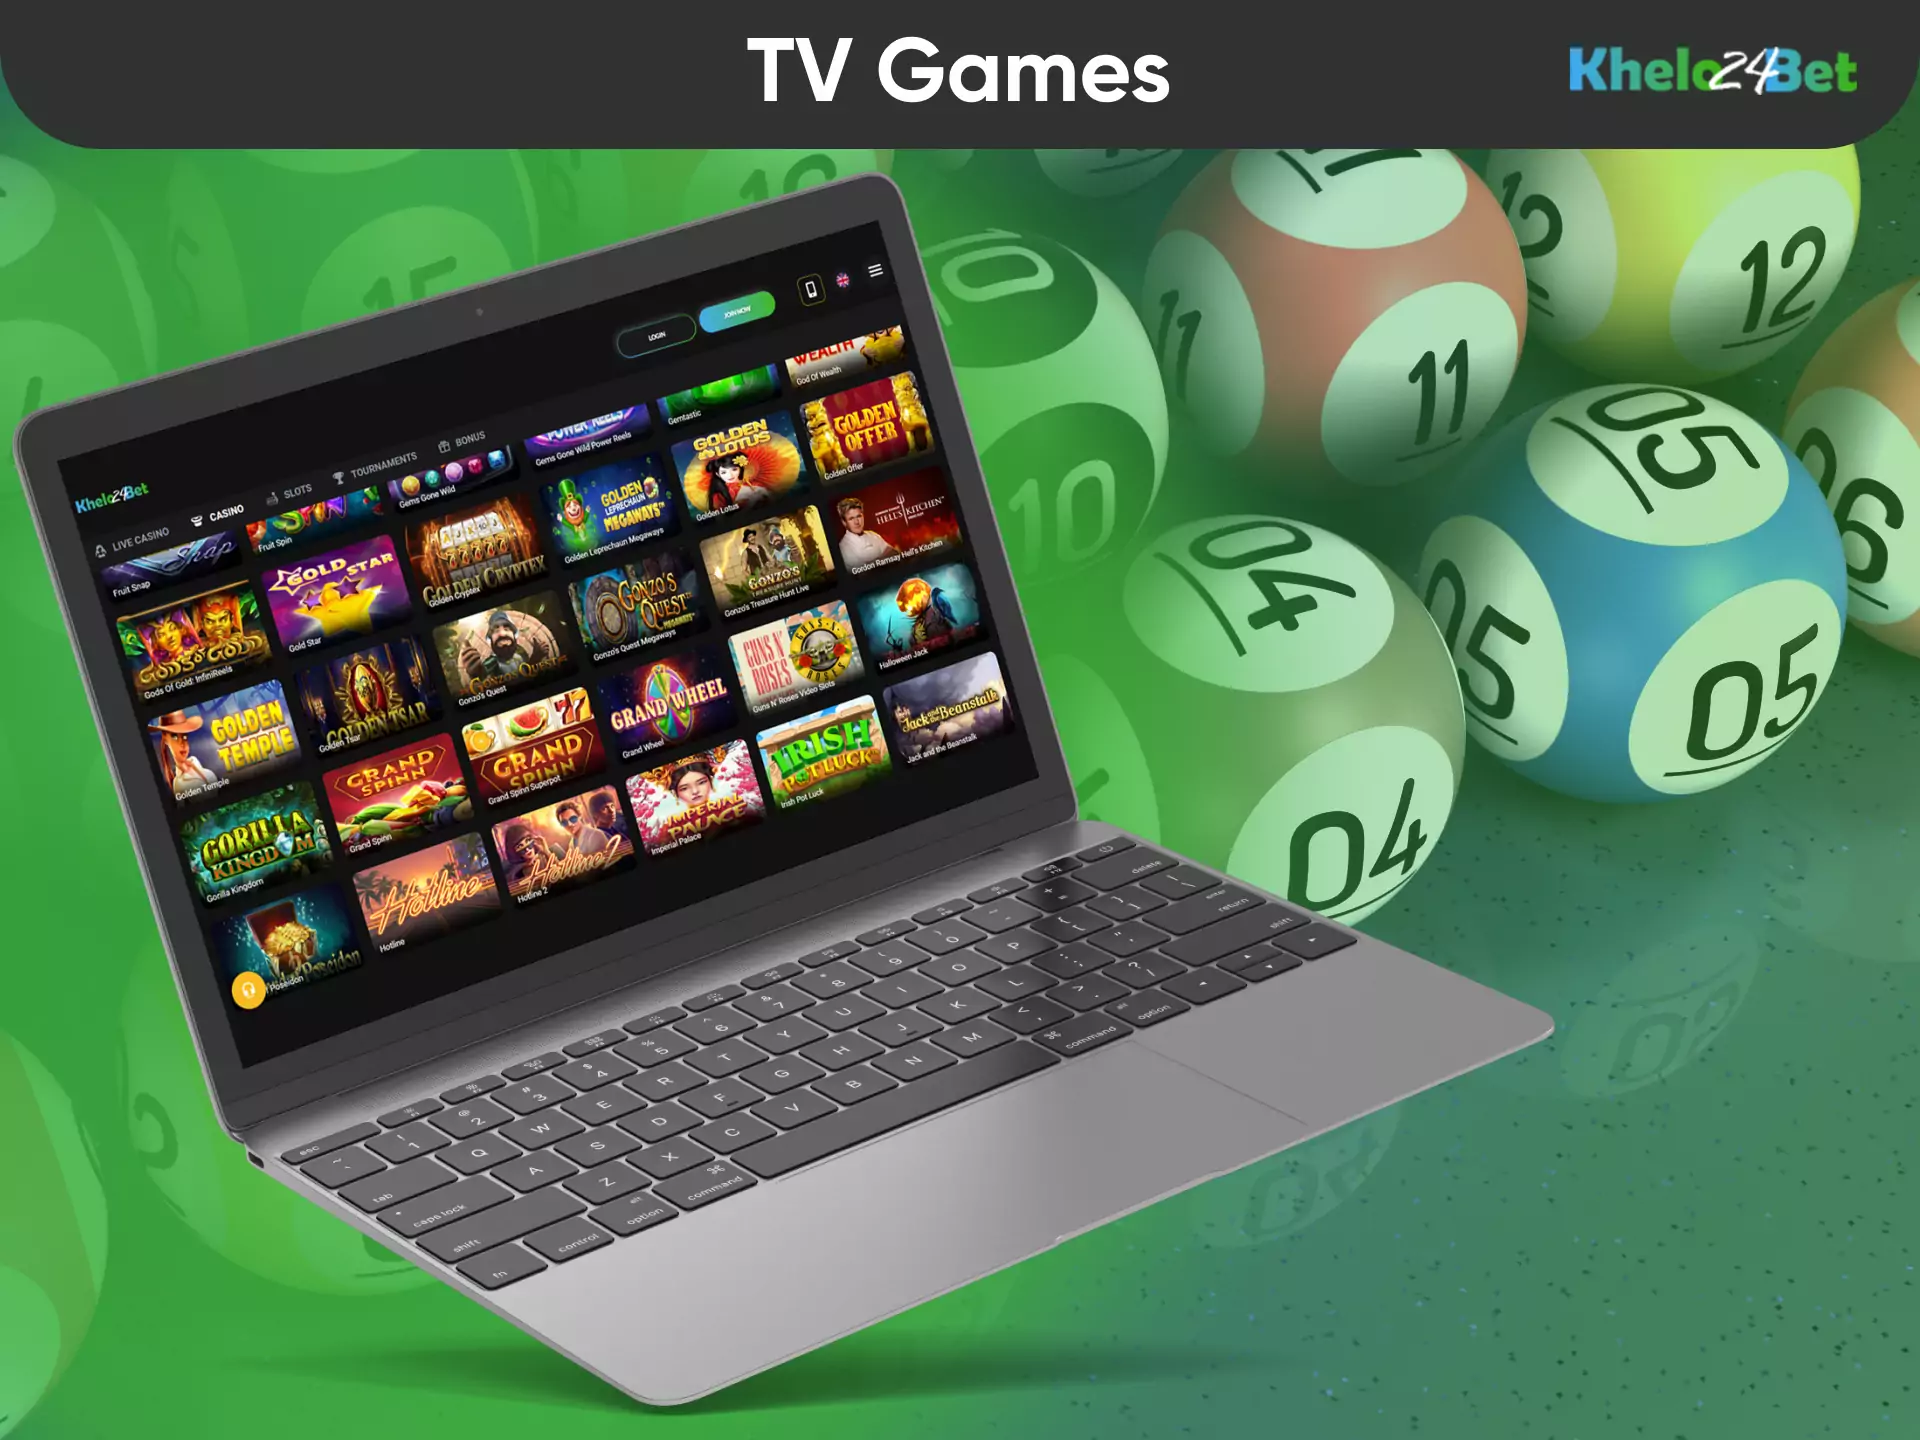 Watch the TV games on the Khelo24bet site and check your results.